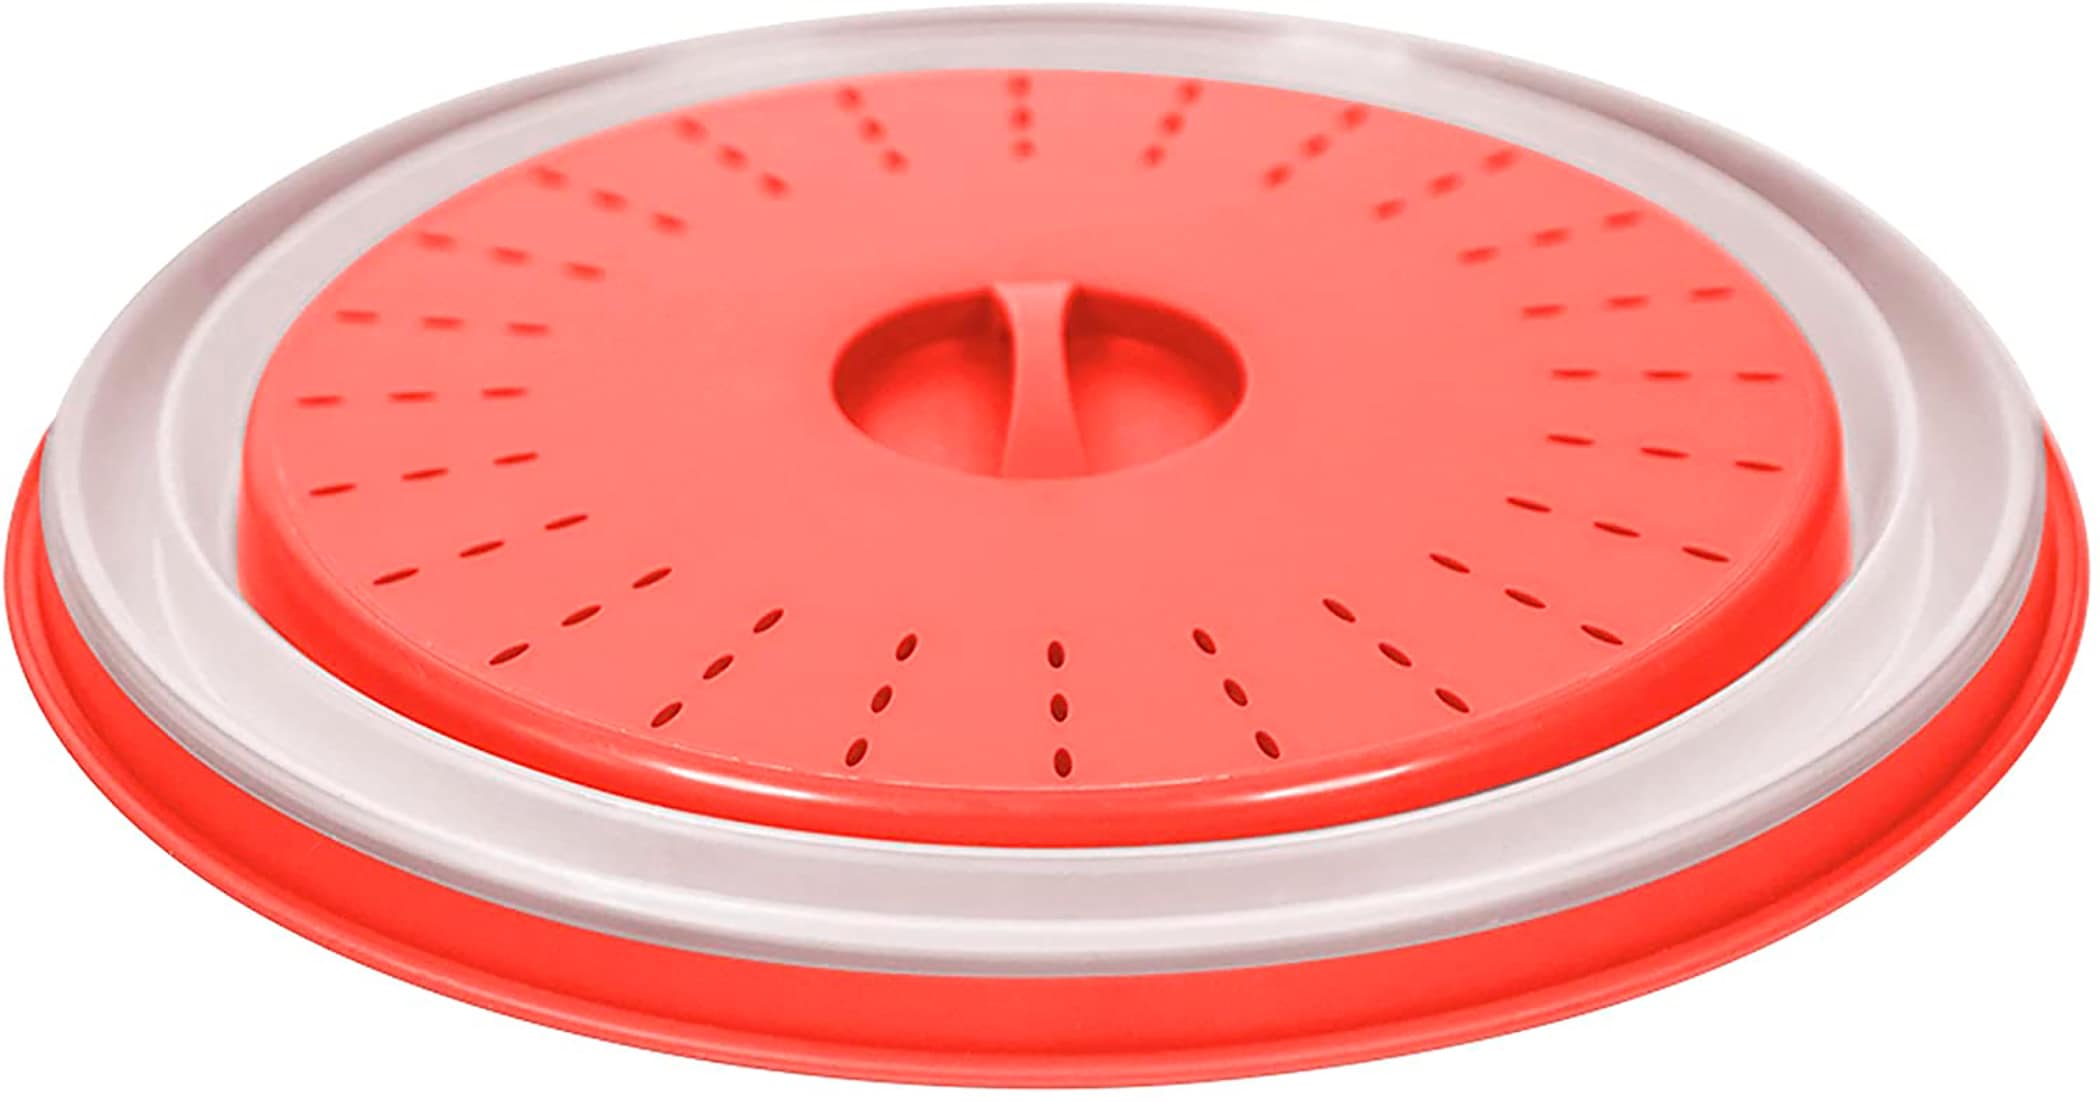 Microwave Cover Bowl Covers Splatter Proof Food Plate Cover Vapor Holes  Silicone Covers for Food Storage Kitchen Accessories Pink 28*32cm